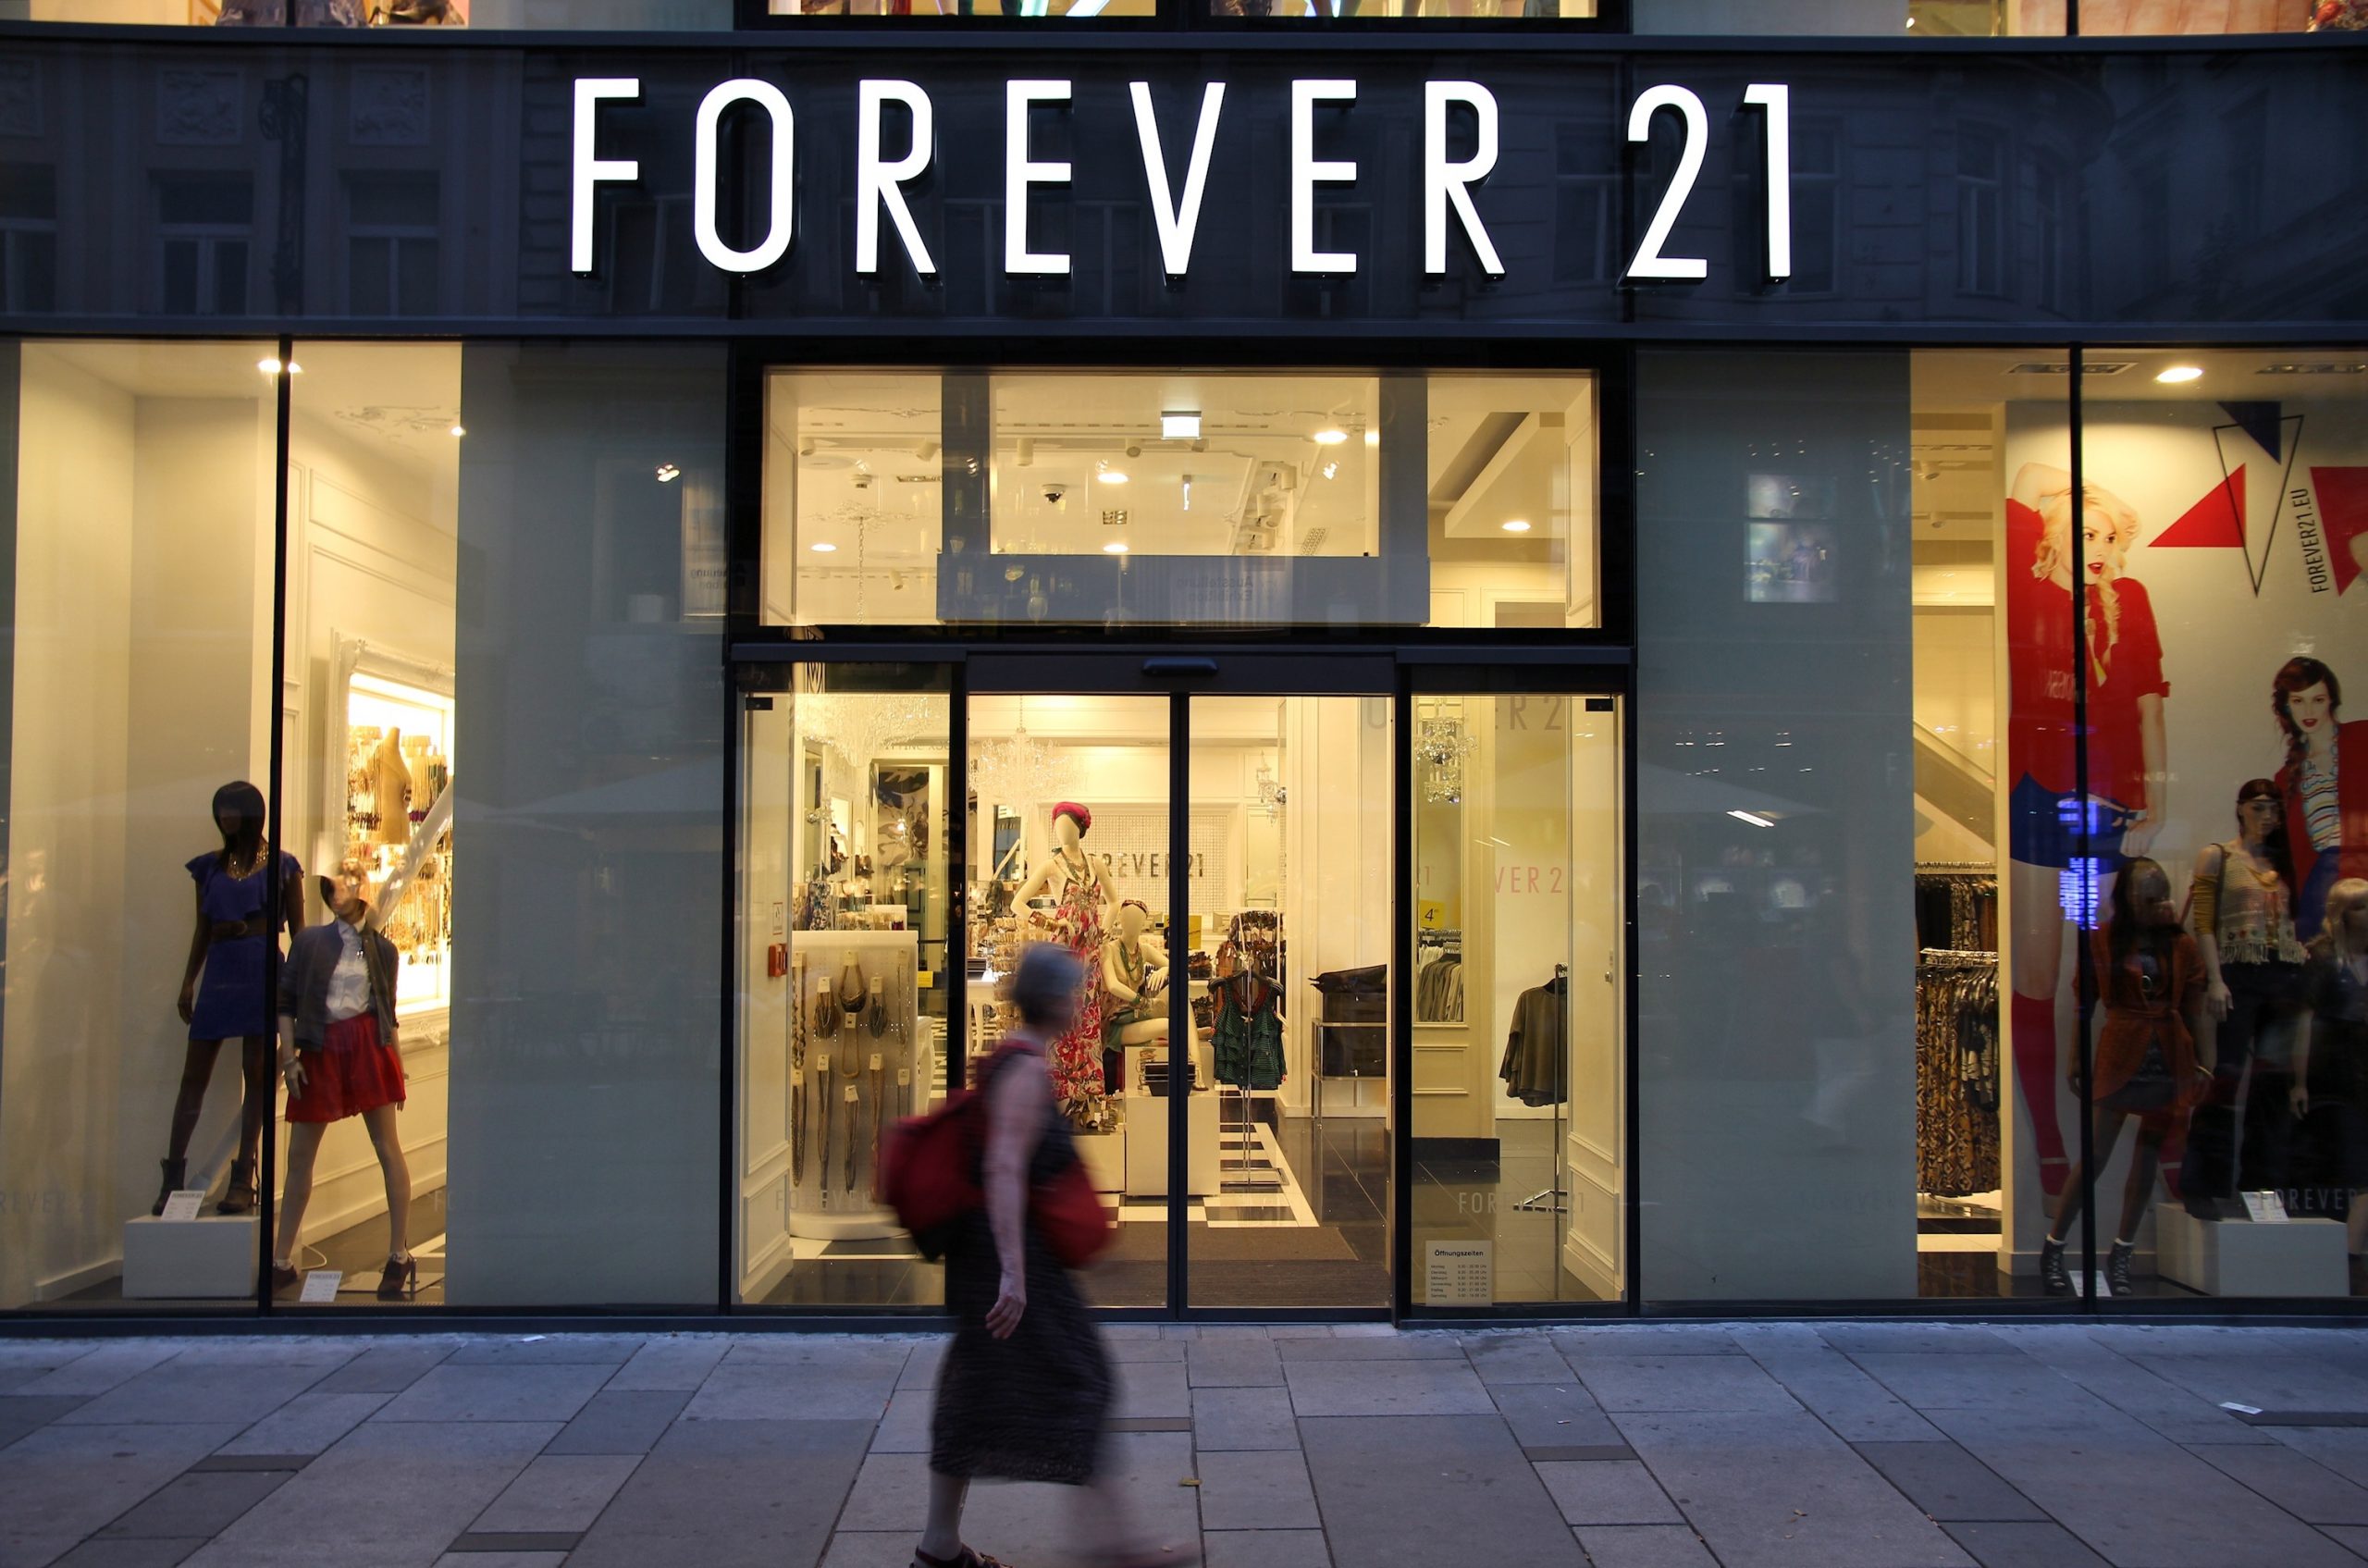 Forever 21 files for bankruptcy - The Boston Globe